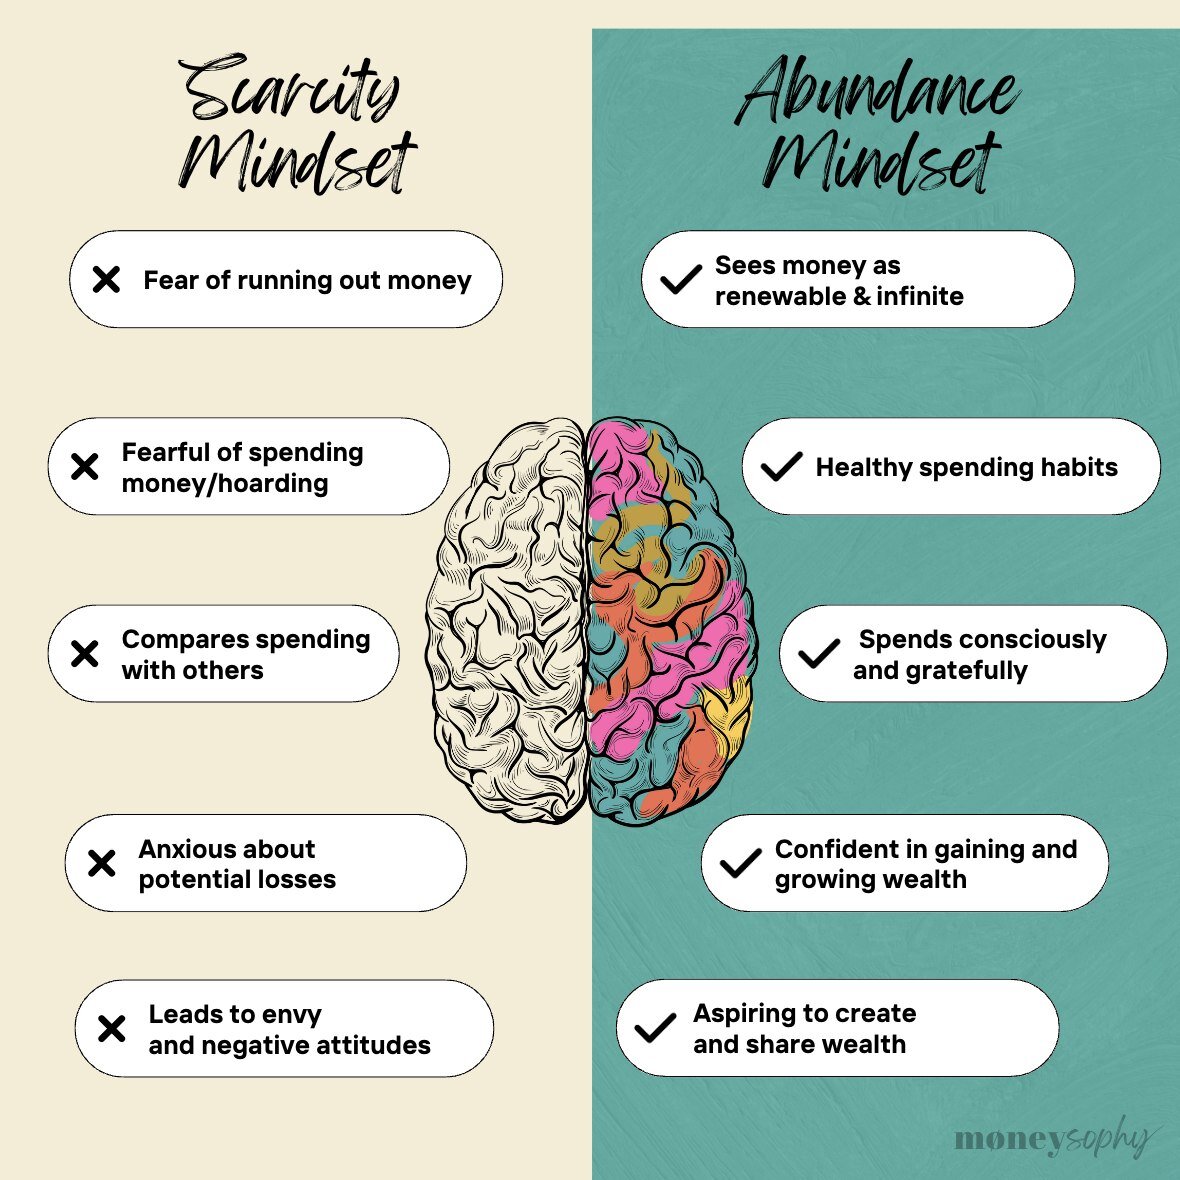 5 ways to shift from Scarcity Mindset to Abundance Mindset 💰

1️⃣ Embrace gratitude: Appreciate what you have, no matter how small. Gratitude attracts more abundance into your life.

2️⃣ Think big: Replace scarcity thoughts with positive affirmation